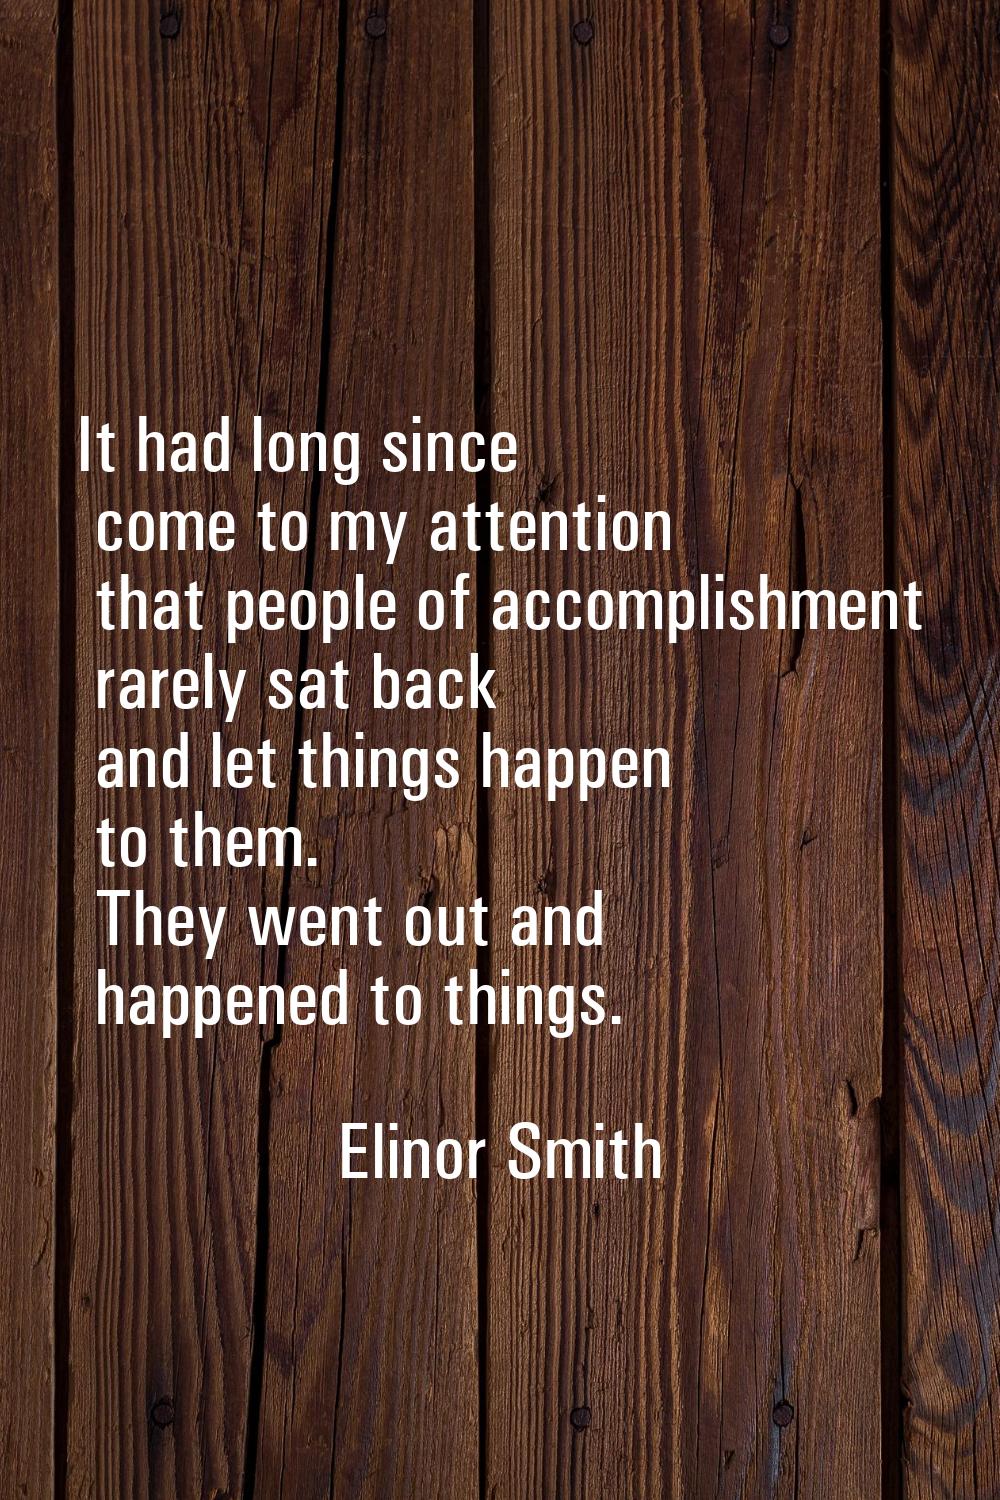 It had long since come to my attention that people of accomplishment rarely sat back and let things